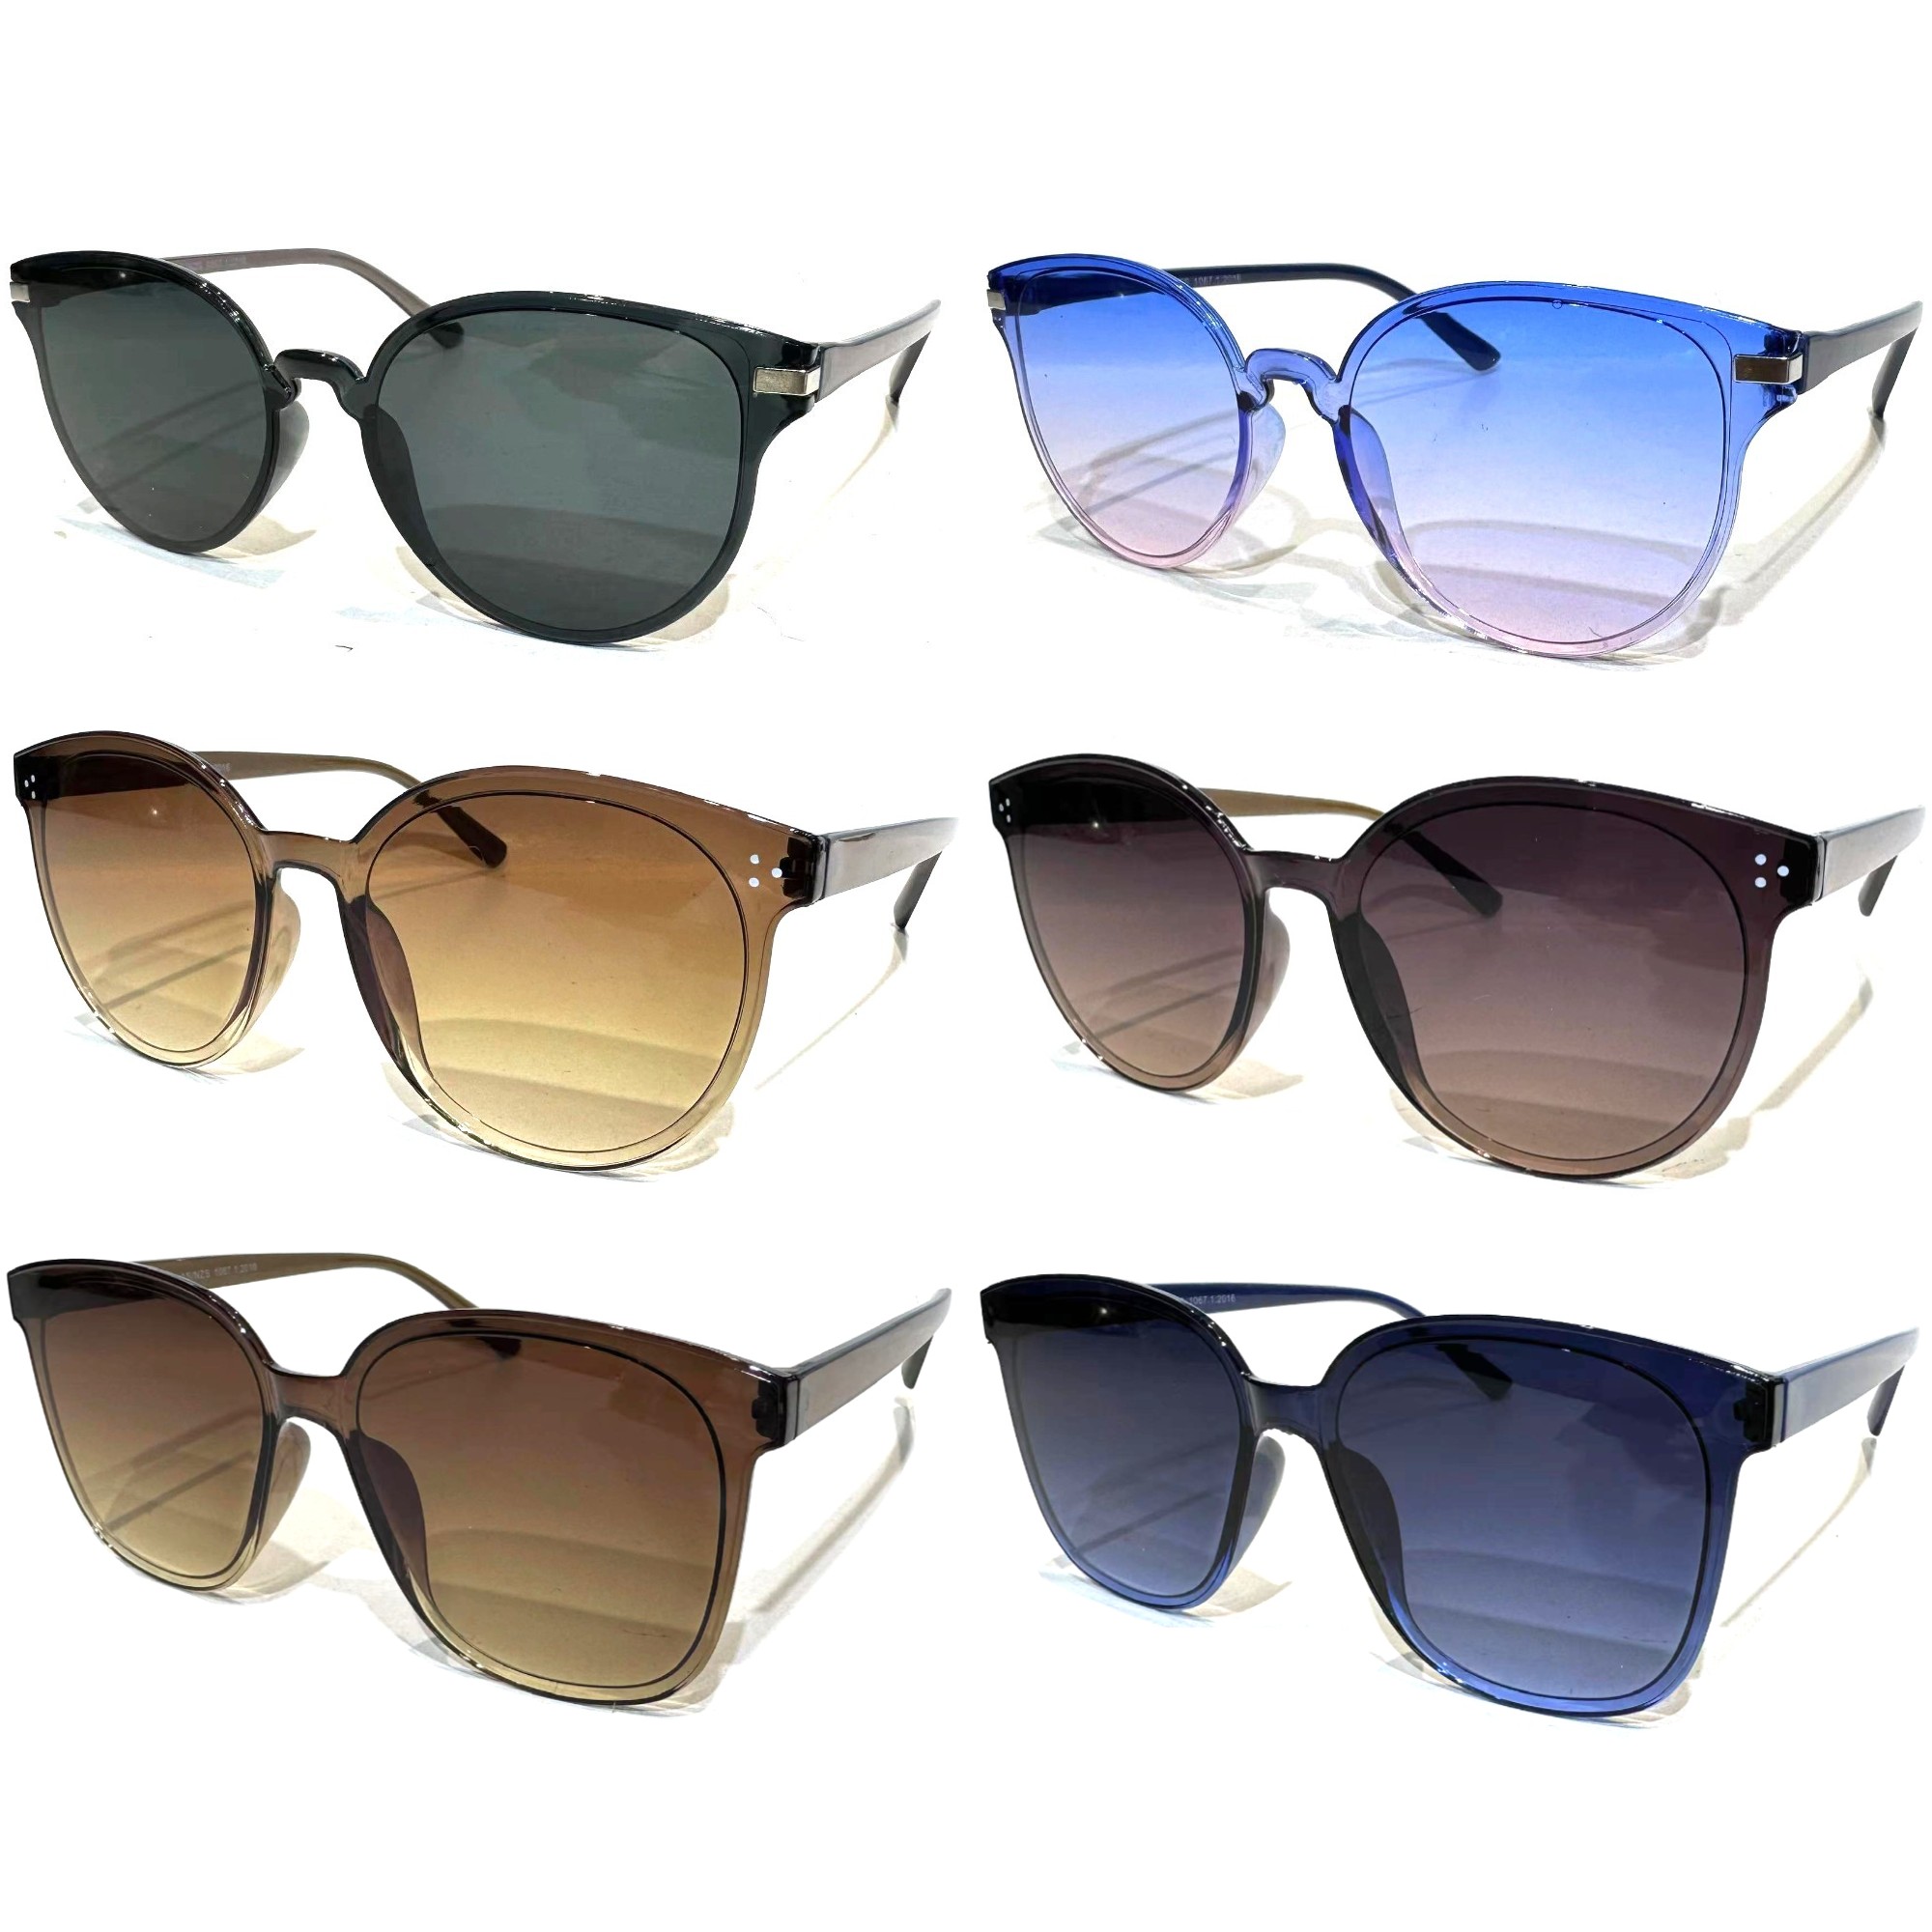 Disgner Fashion Sunglasses The Bondi Collection 3 Style Group FP1377/8/9-1 - Click Image to Close